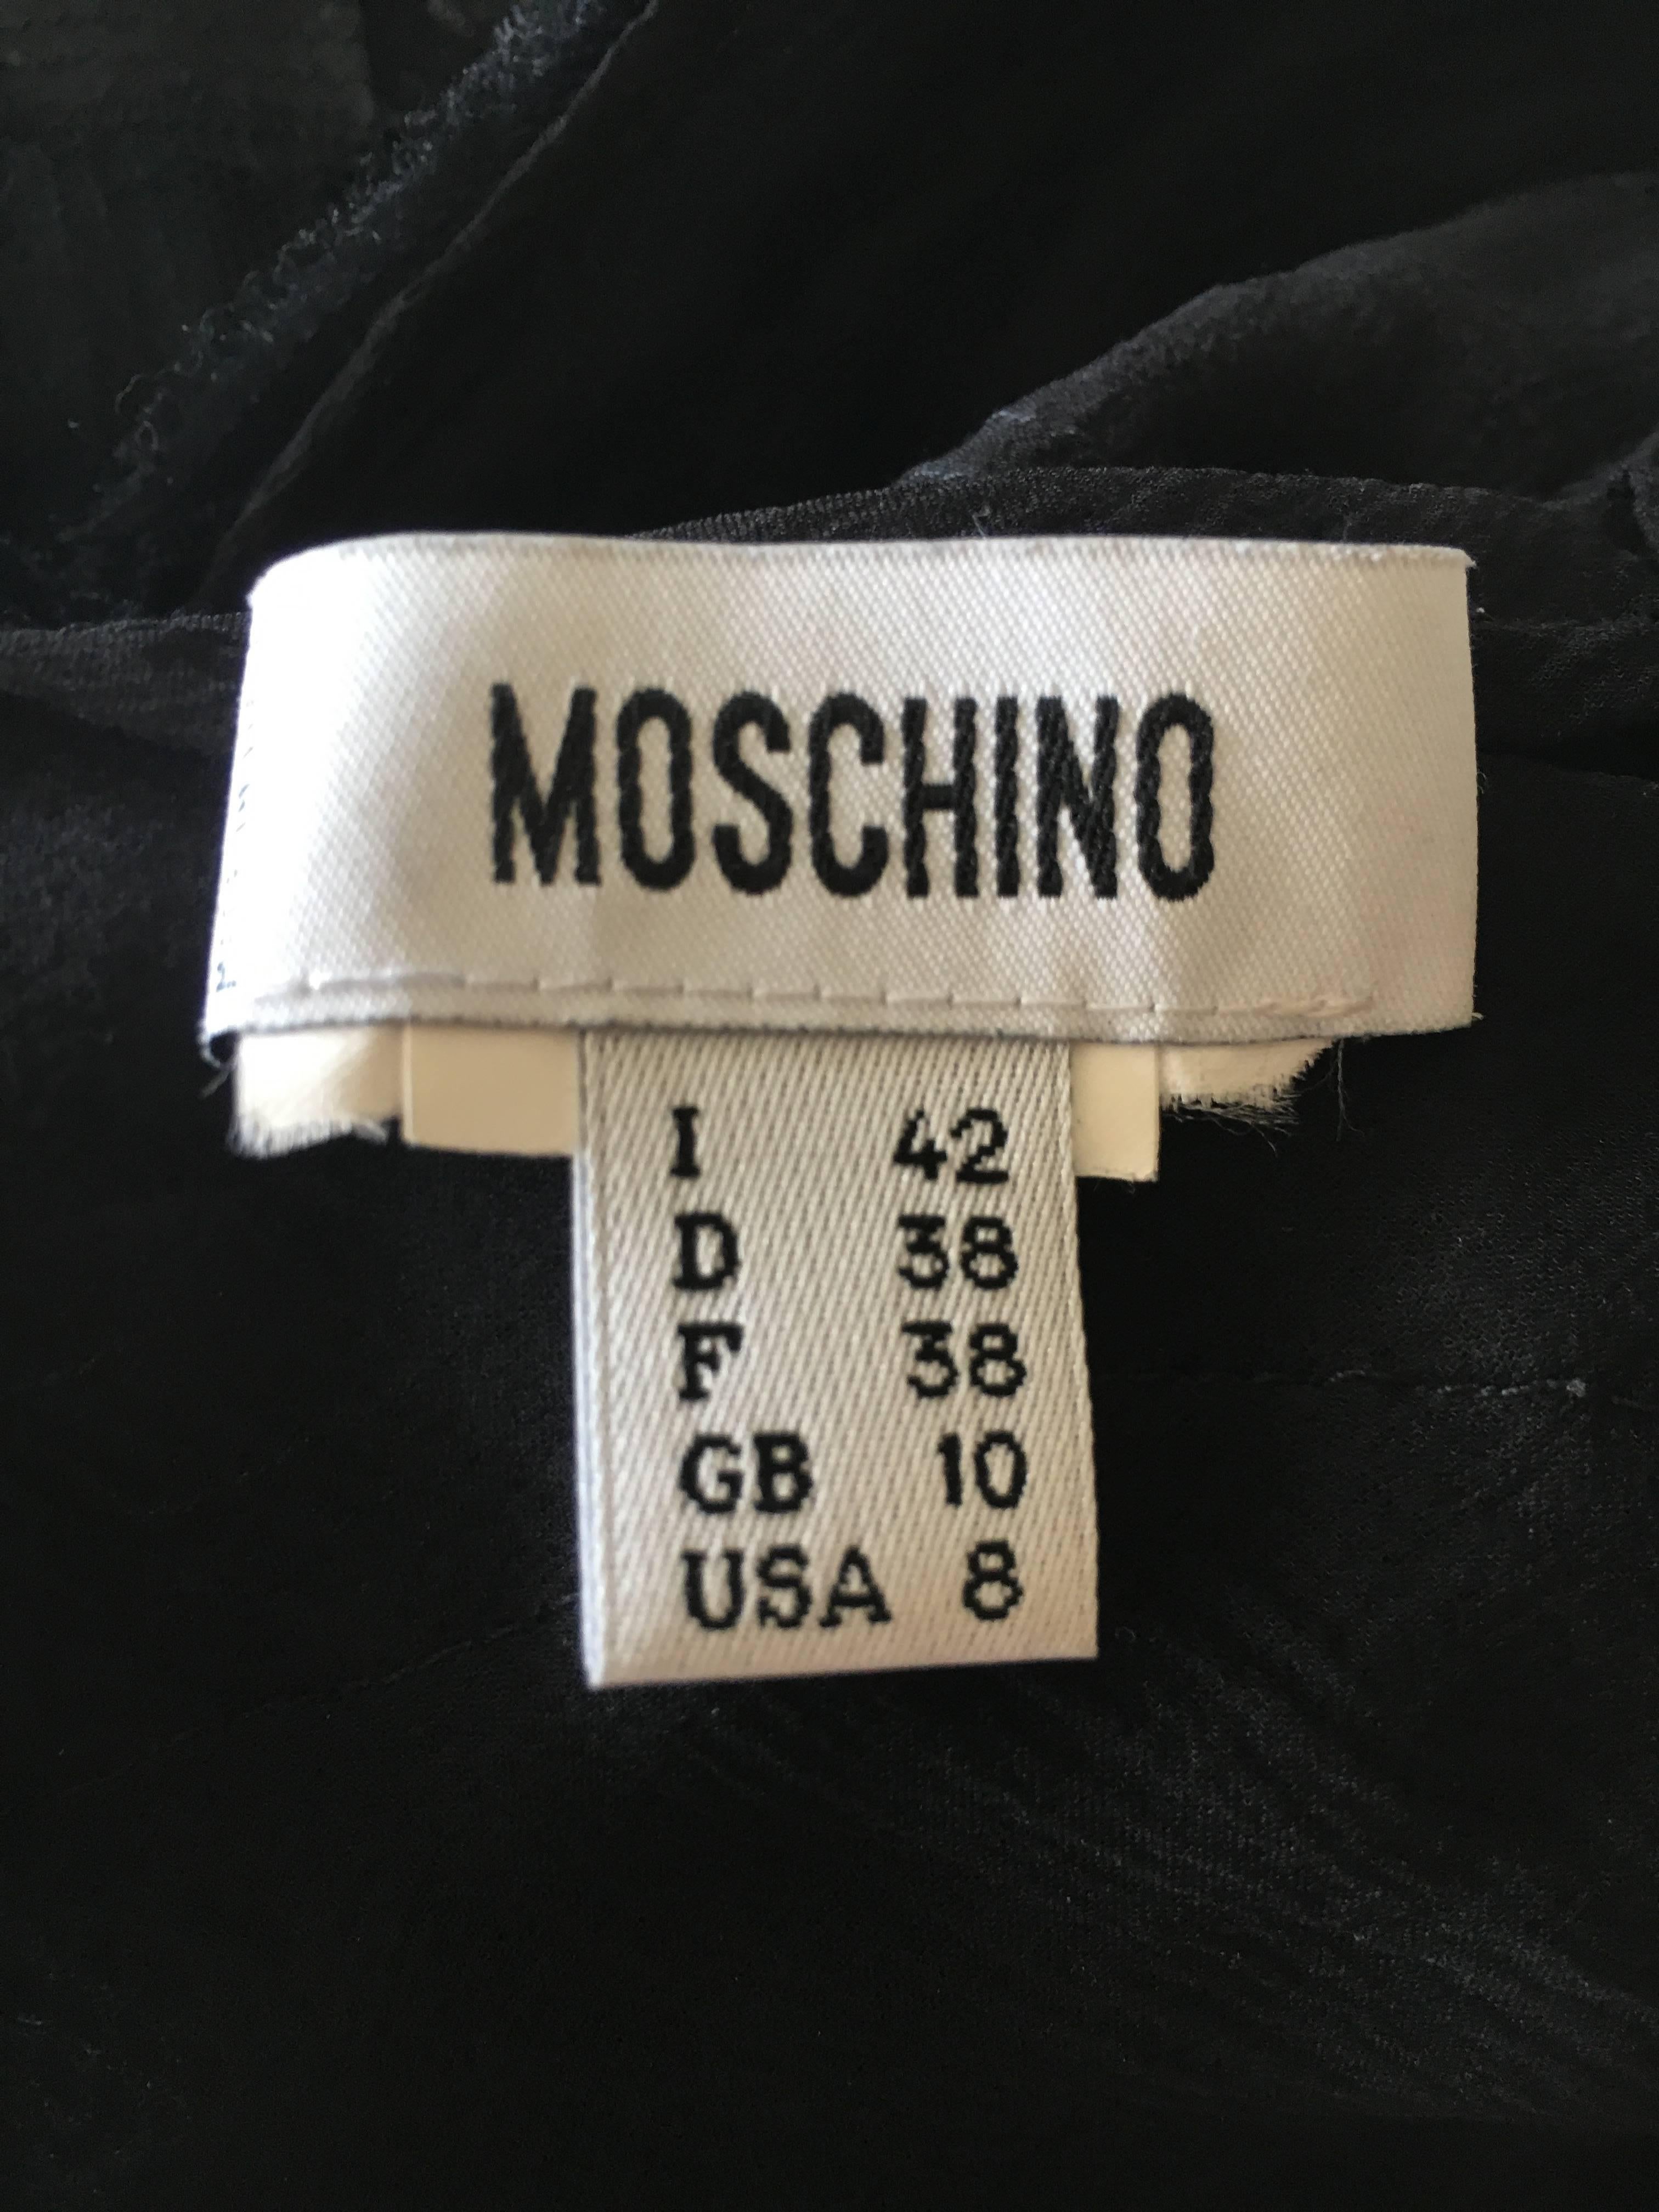 Moschino Sheer Black Dress with Lace Bow Accent's For Sale 4